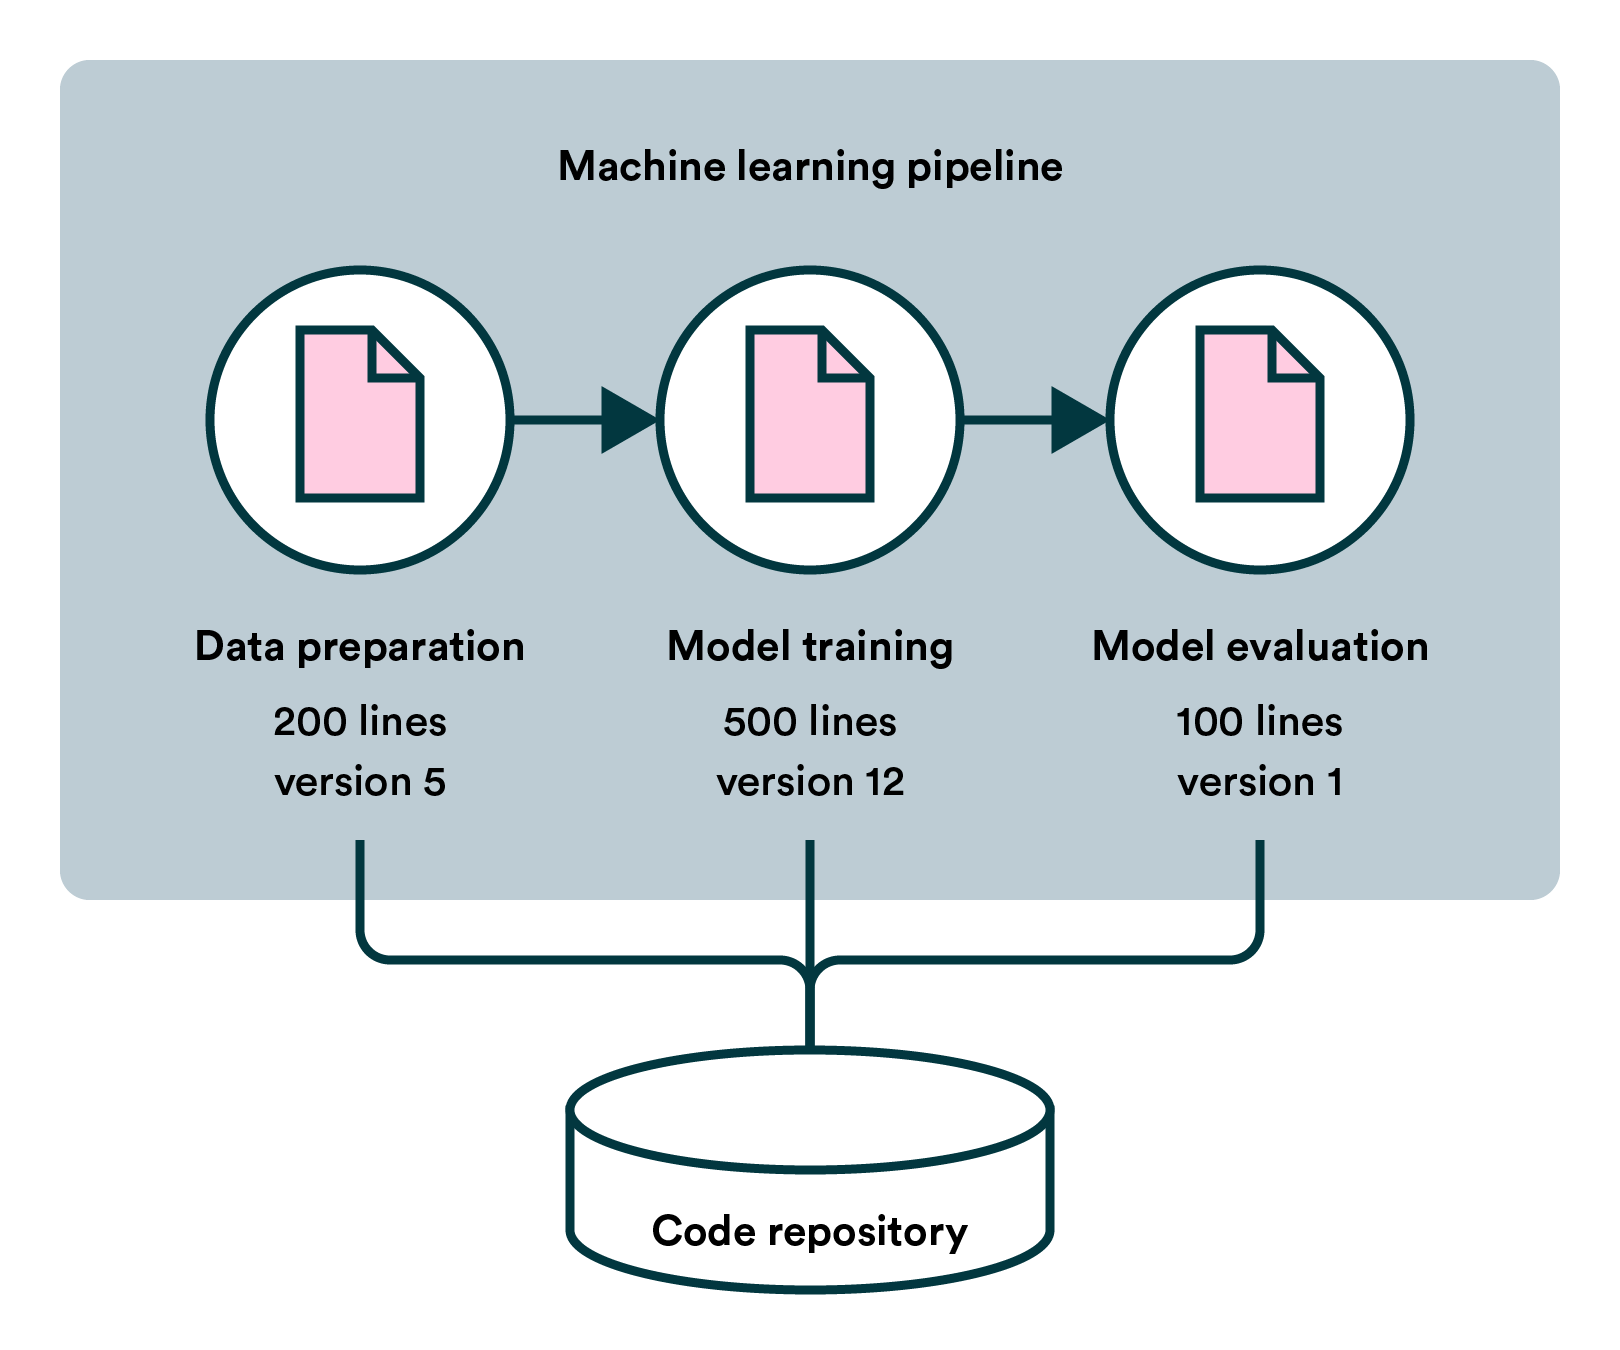 Machine learning pipeline makes model creation more shareable